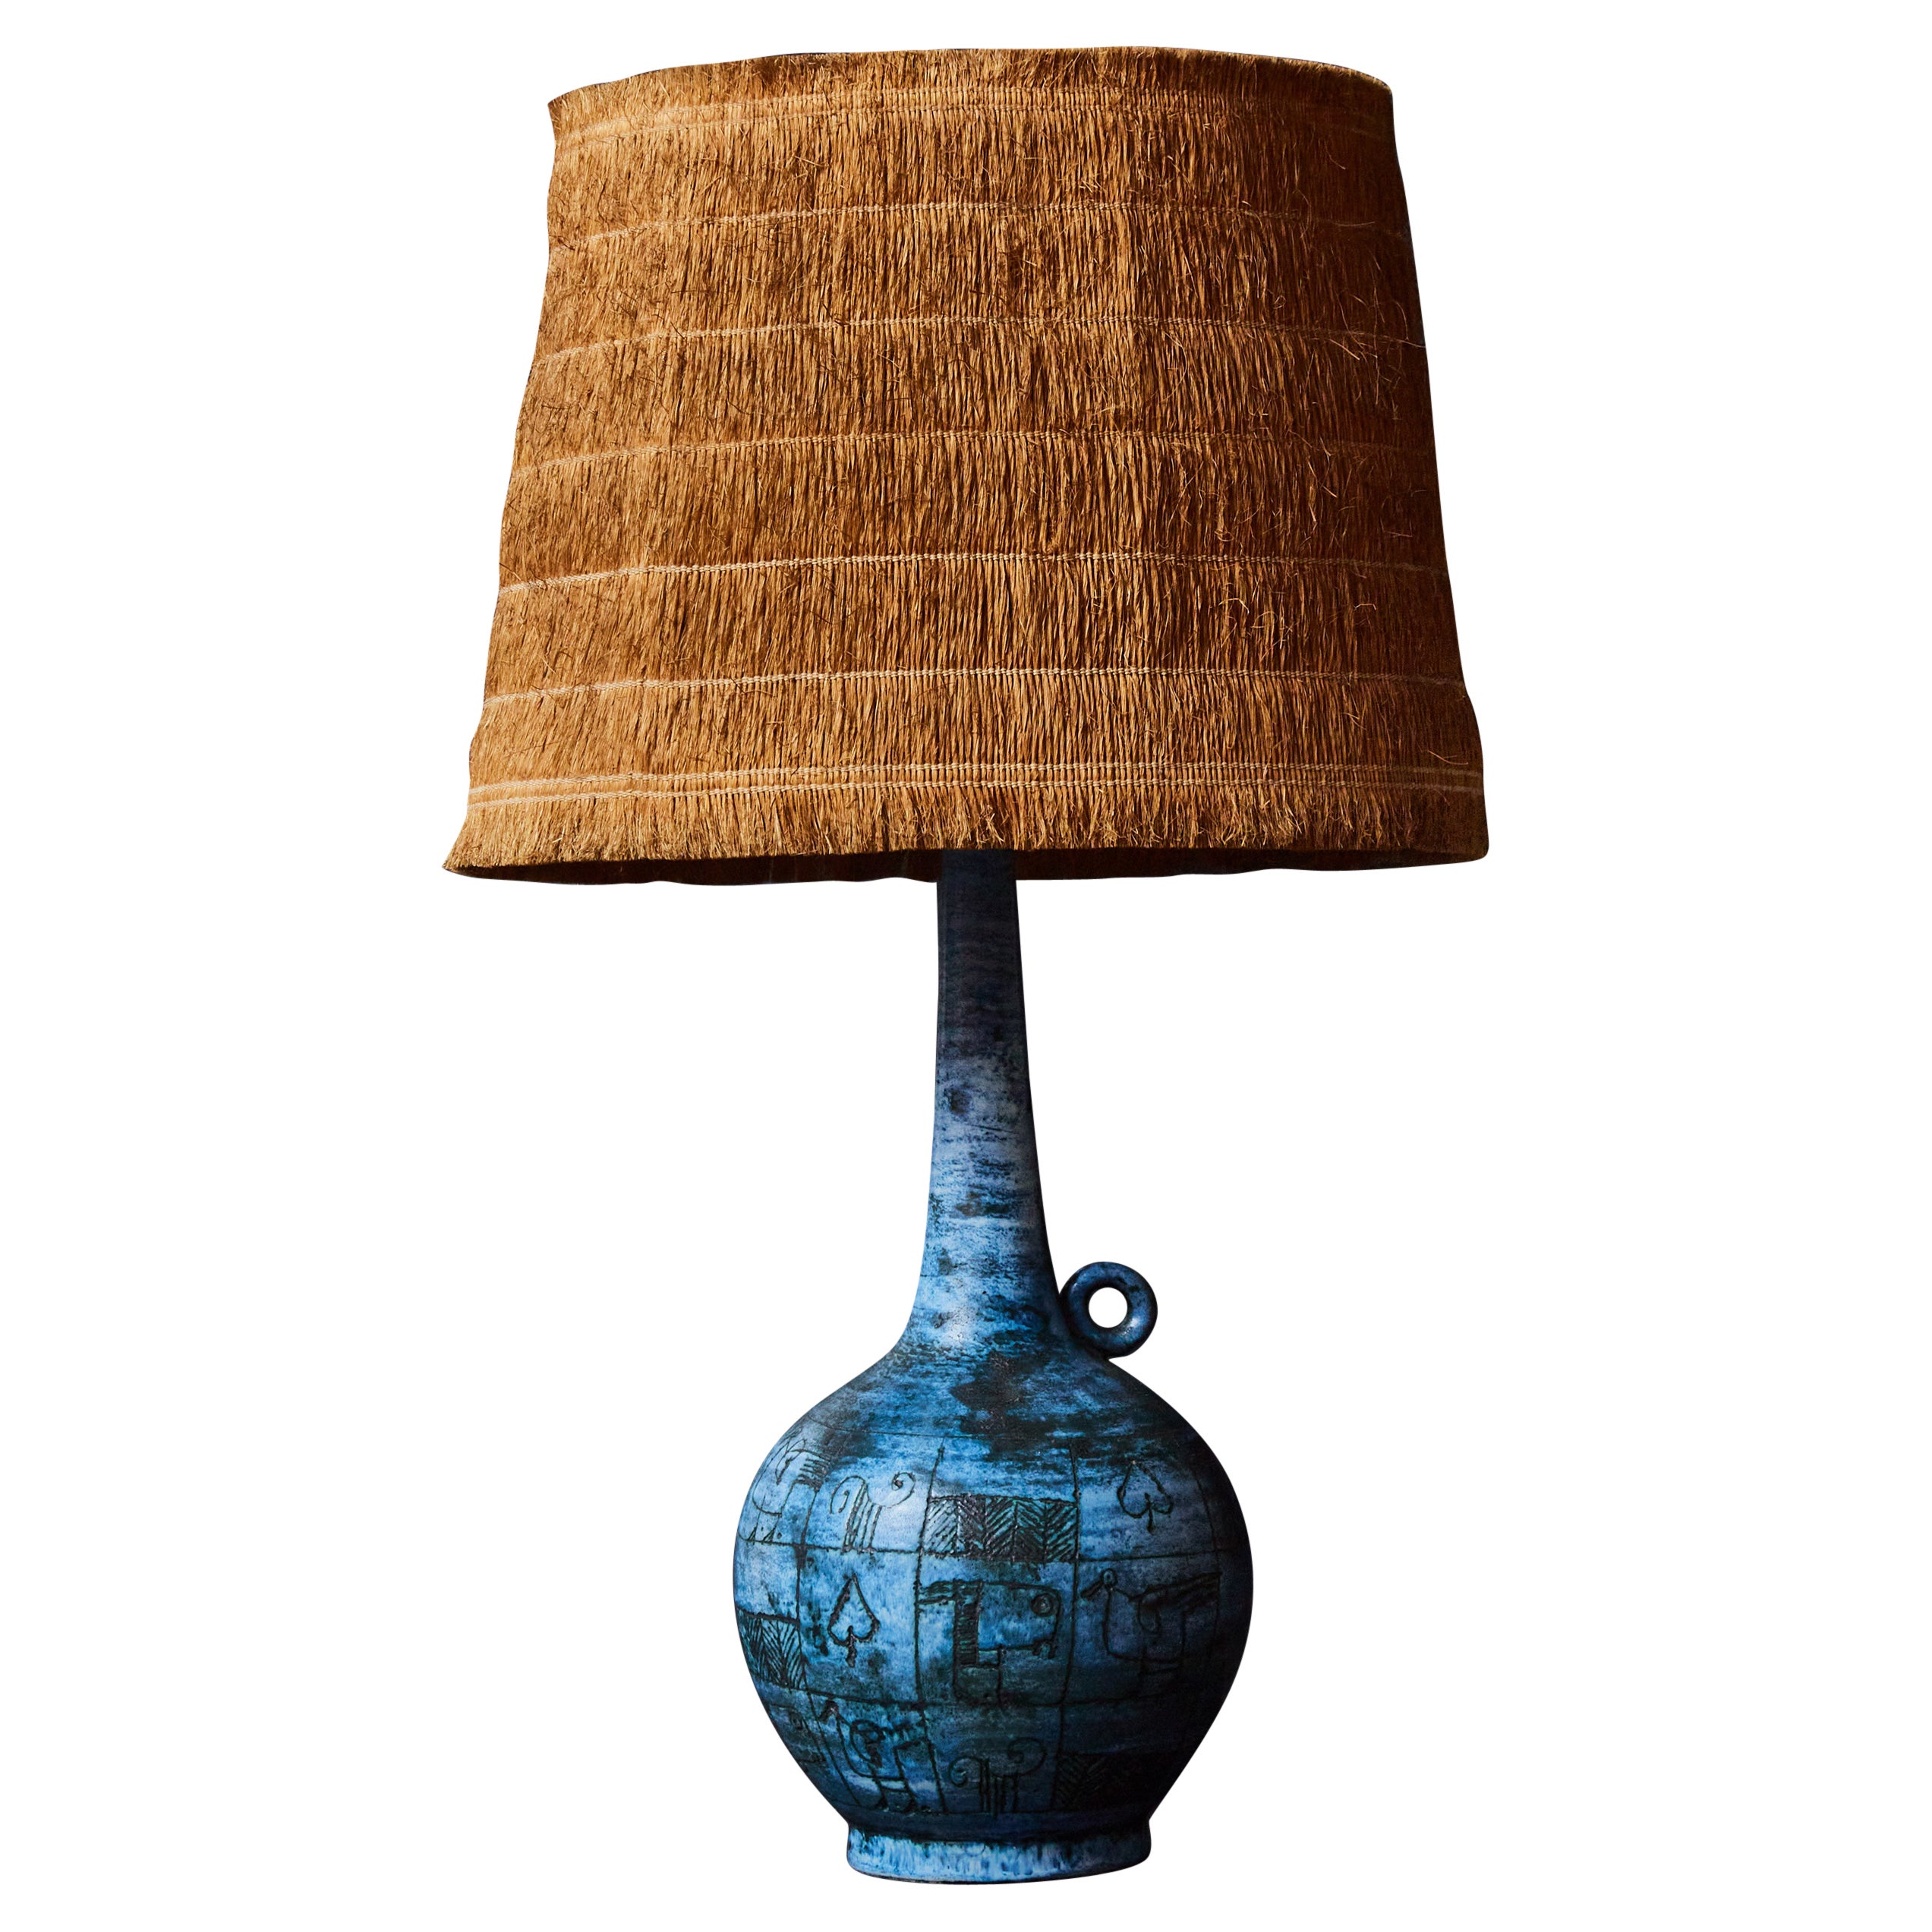 Blue Glazed Ceramic Lamp by Jacques Blin